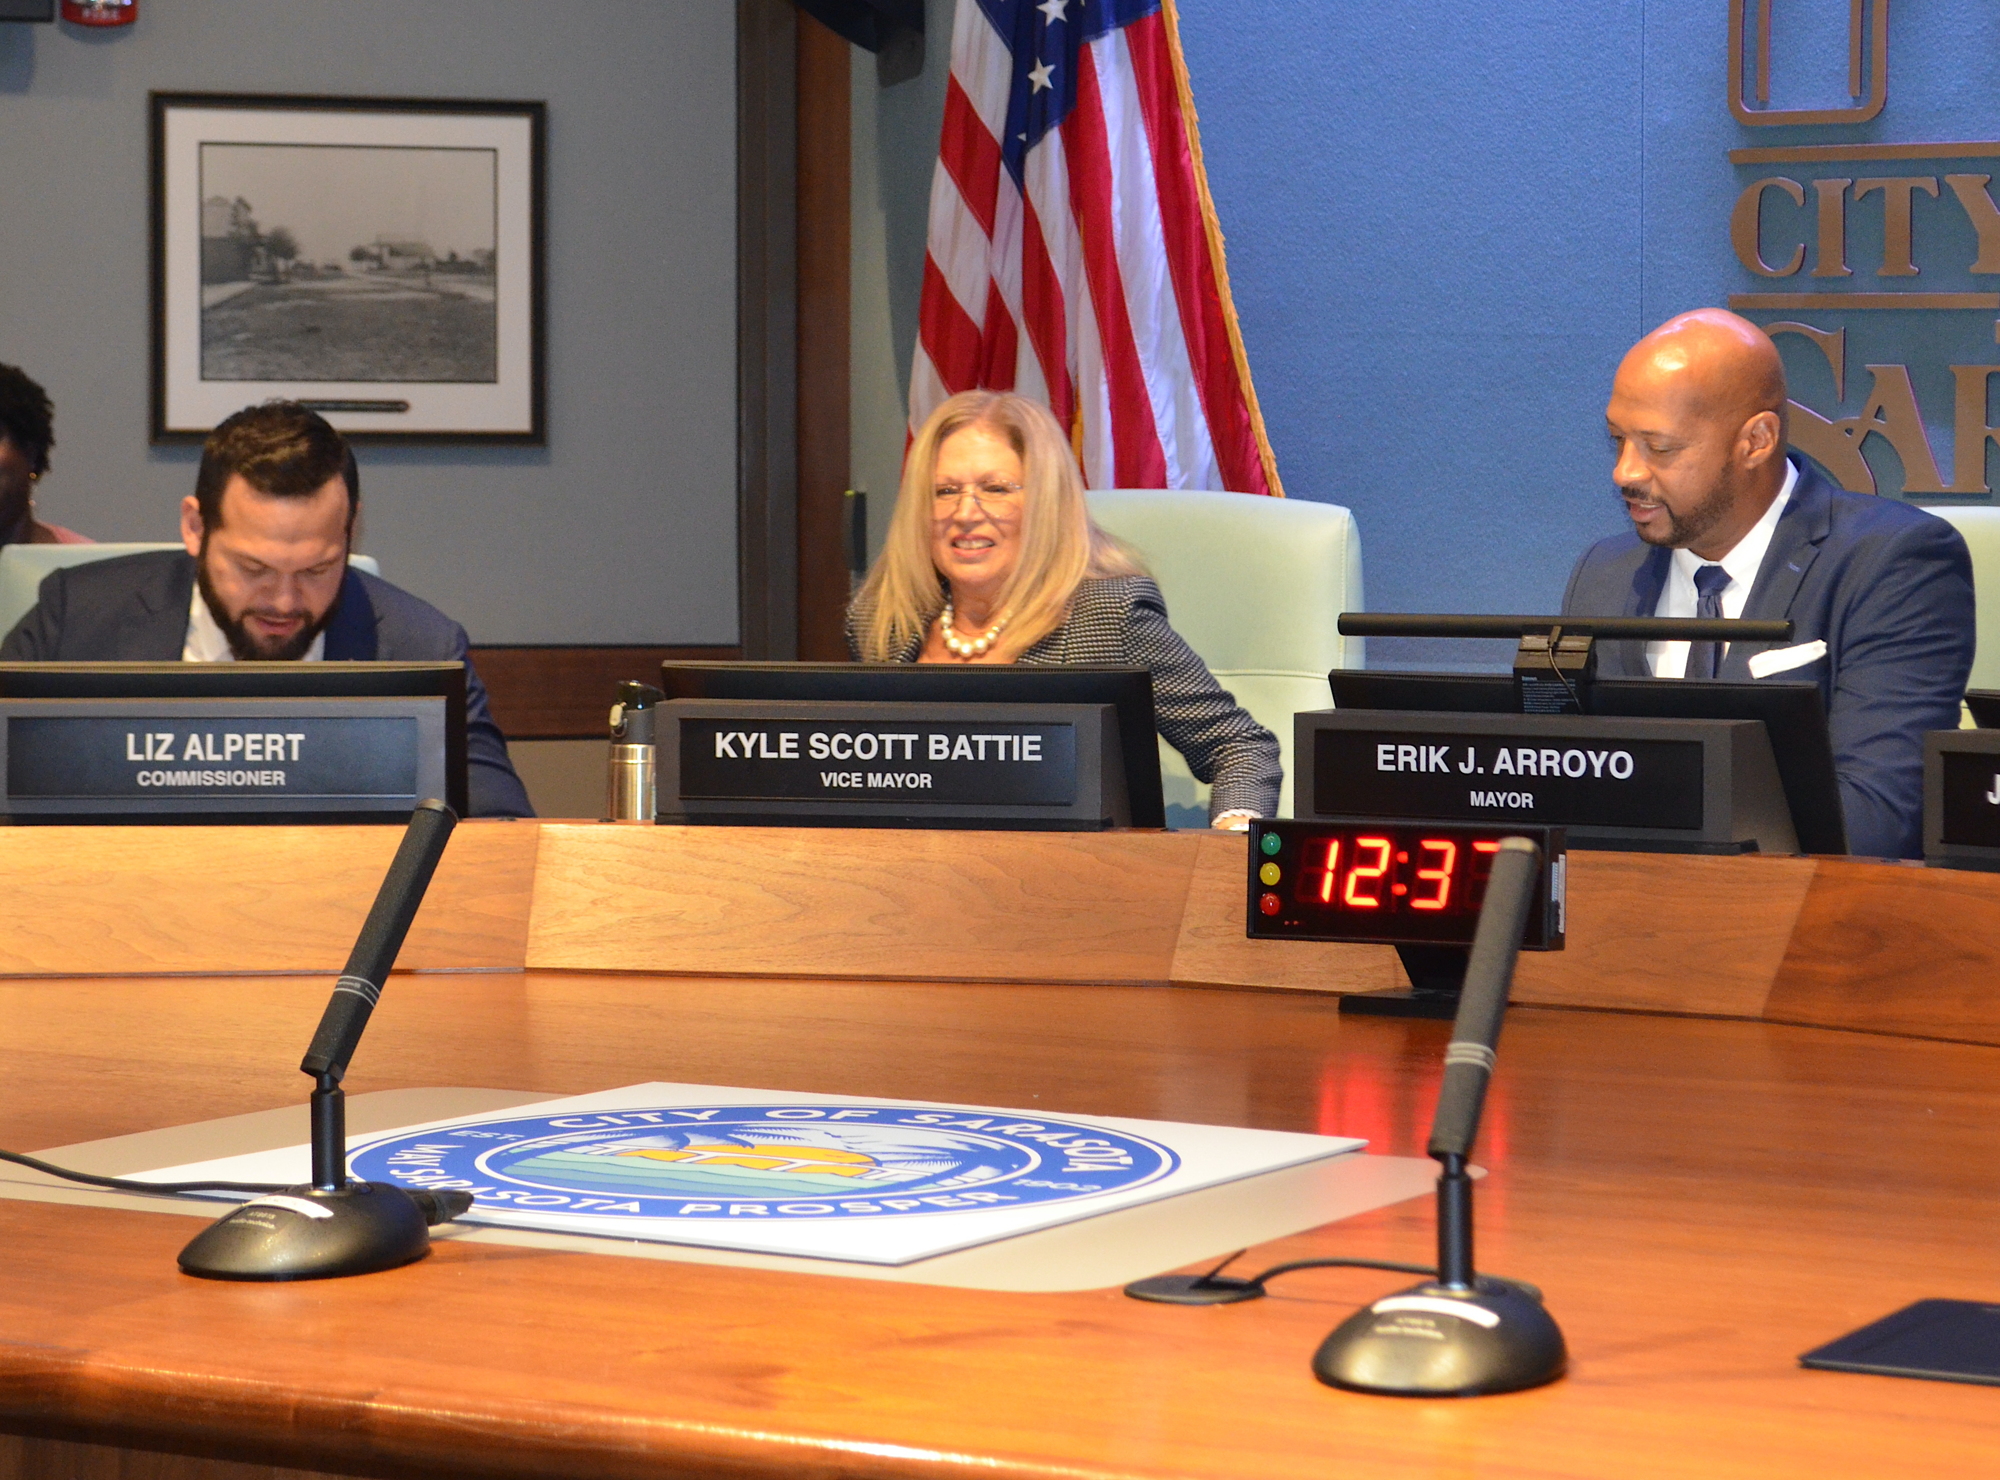 From left, former Sarasota mayor Erik Arroyo, new vice mayor Liz Alpert and new mayor Kyle Battie swap seats at the dais. Changing the nameplates in front of their seats will come later. (Andrew Warfield)